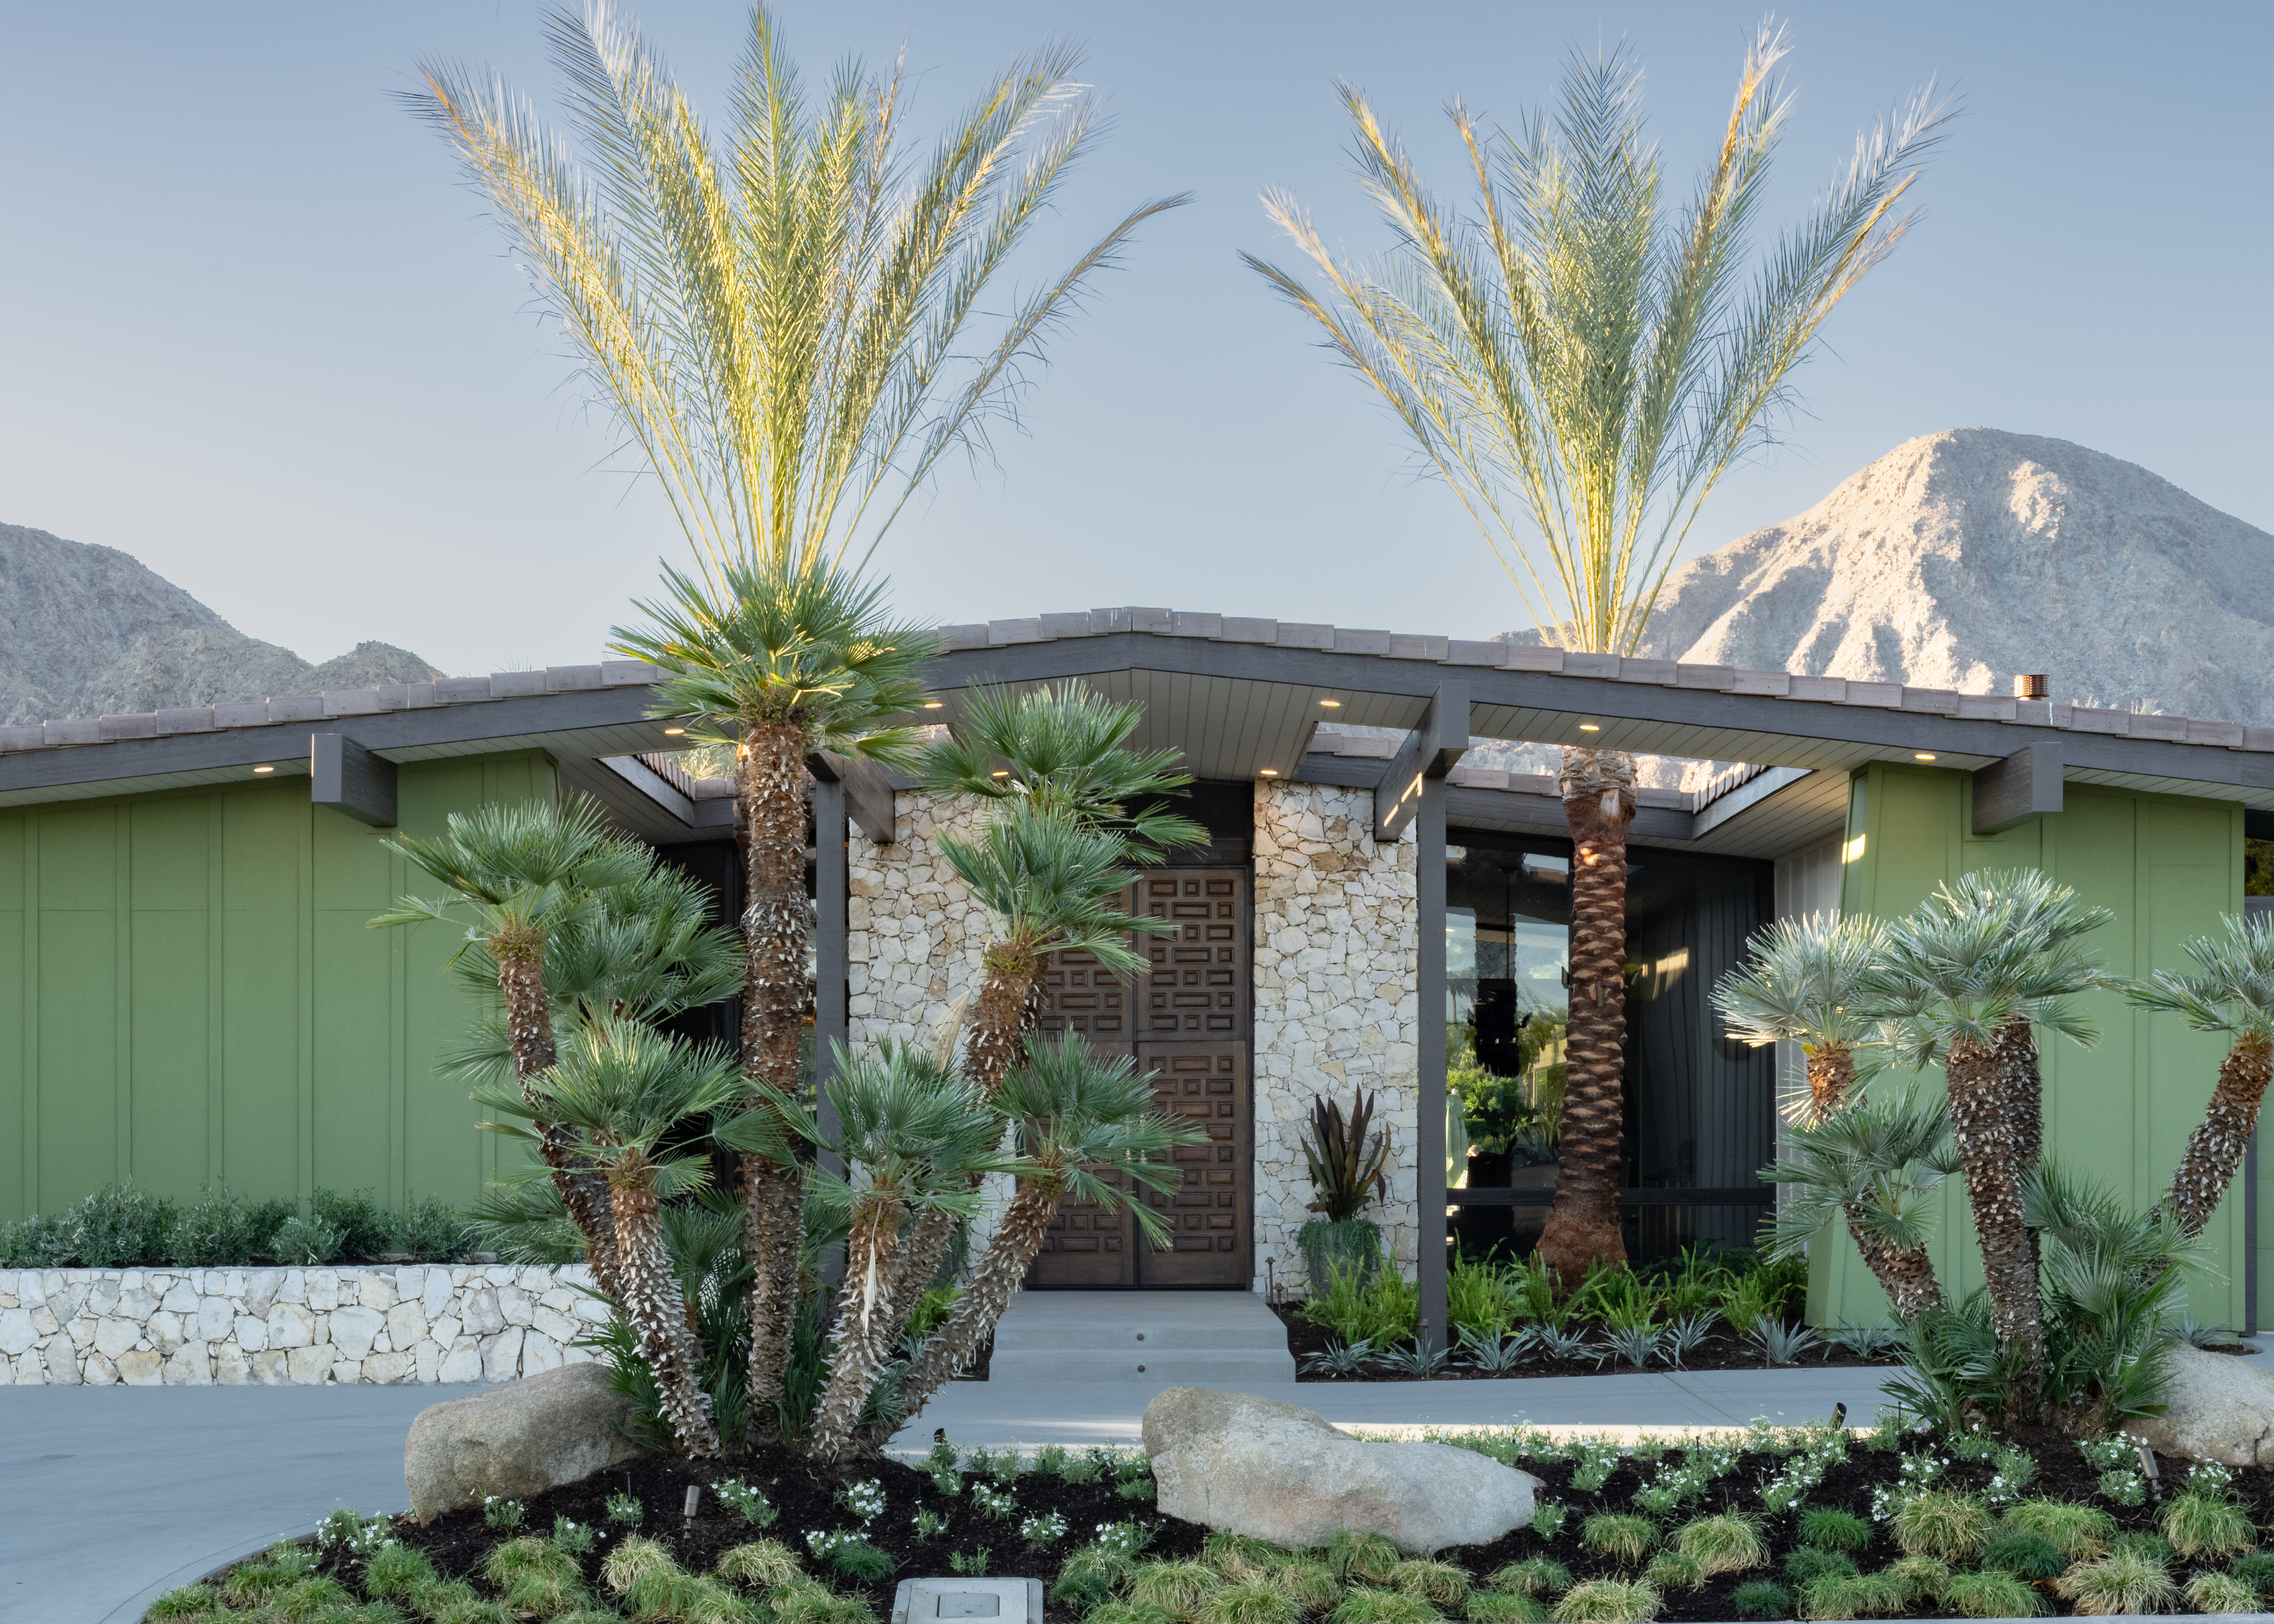 Favorite Spaces from the Desert Oasis Show House